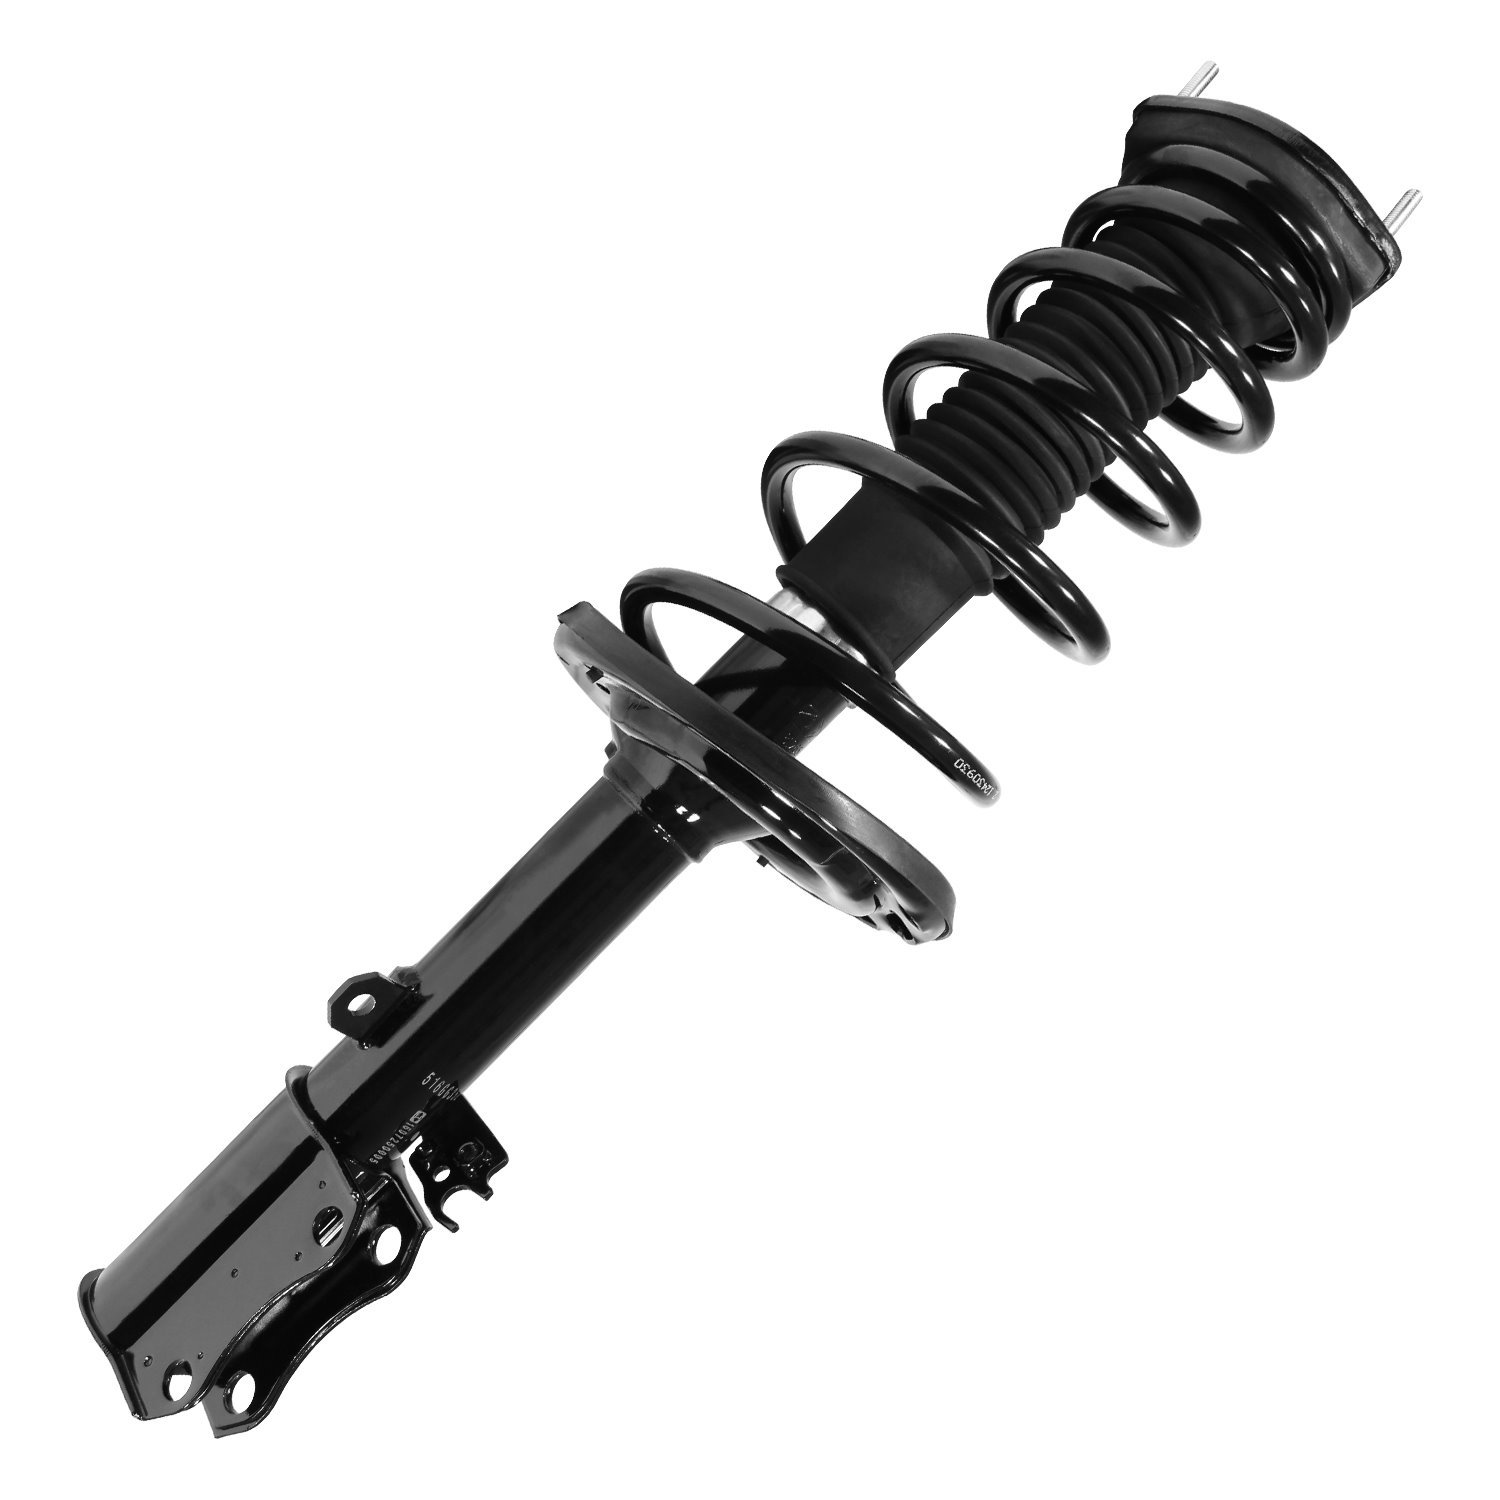 15352 Suspension Strut & Coil Spring Assembly Fits Select Lexus ES330, Toyota Camry, Toyota Solara